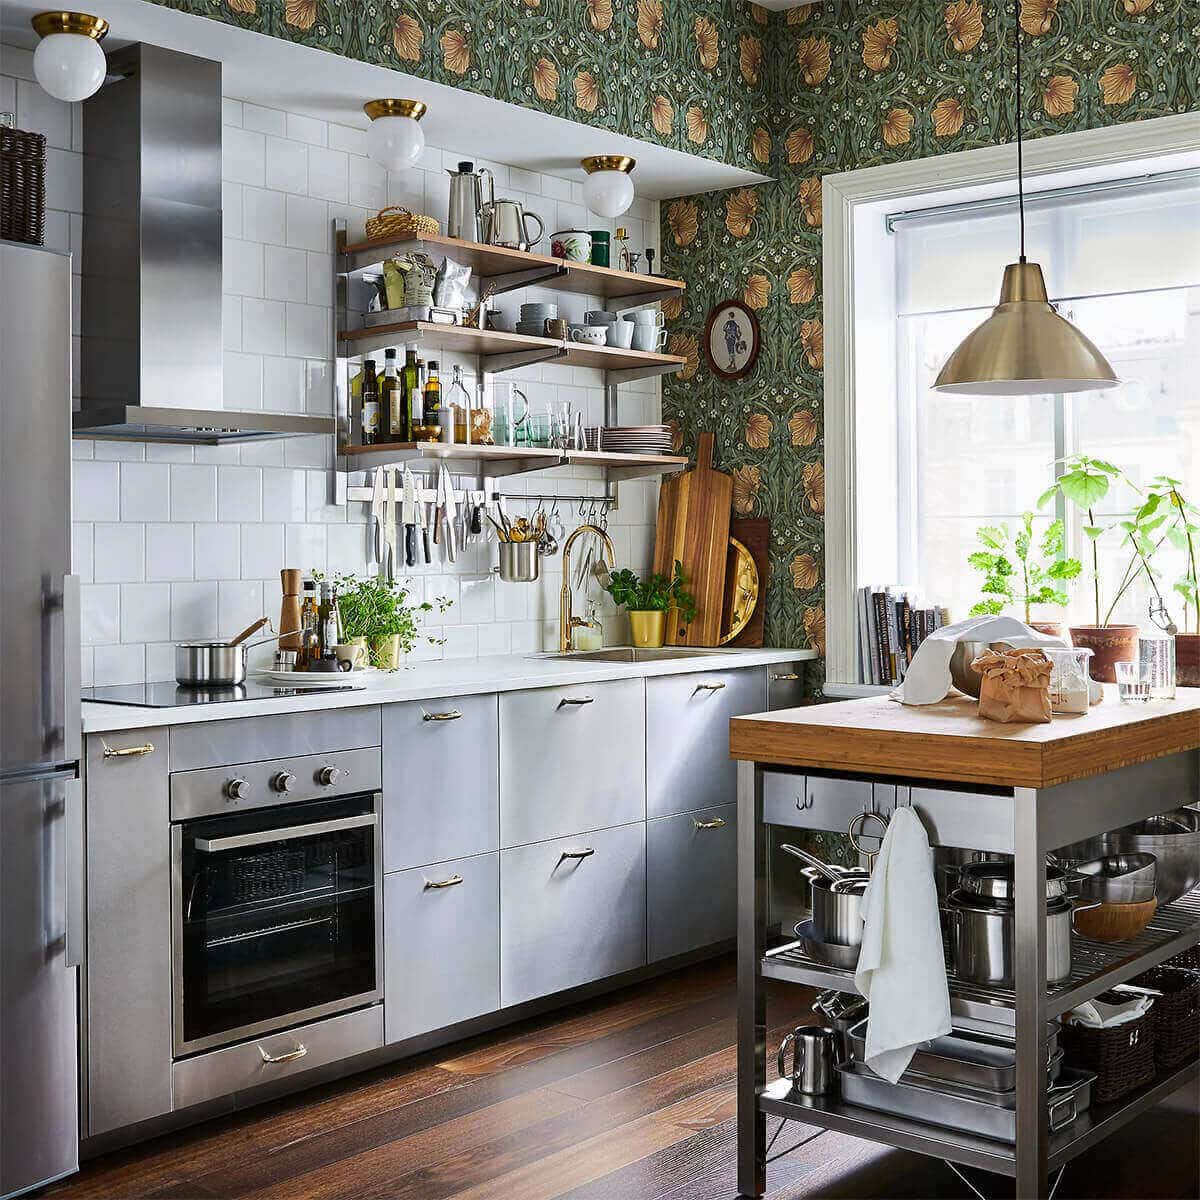 23 Small Kitchen Design Ideas, Layout, Storage and More